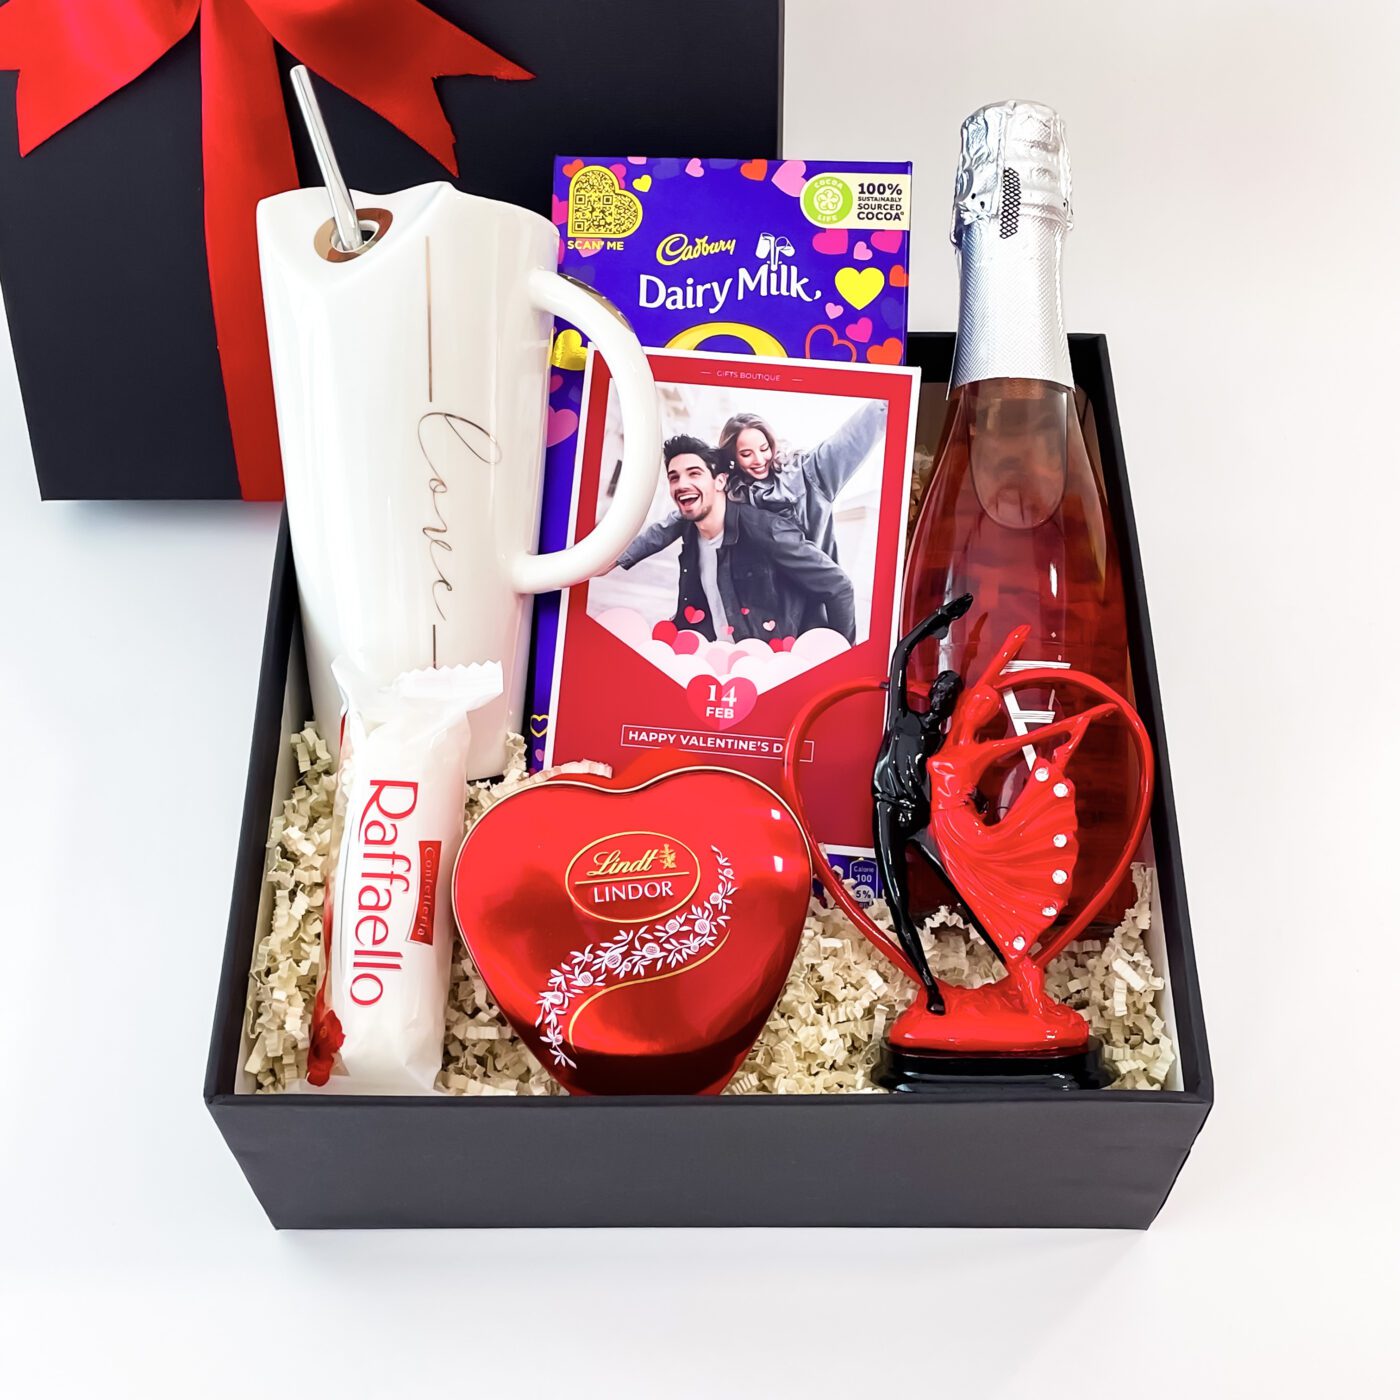 The Ultimate Romantic Valentine's Day Gifts For Her - Rediff.com